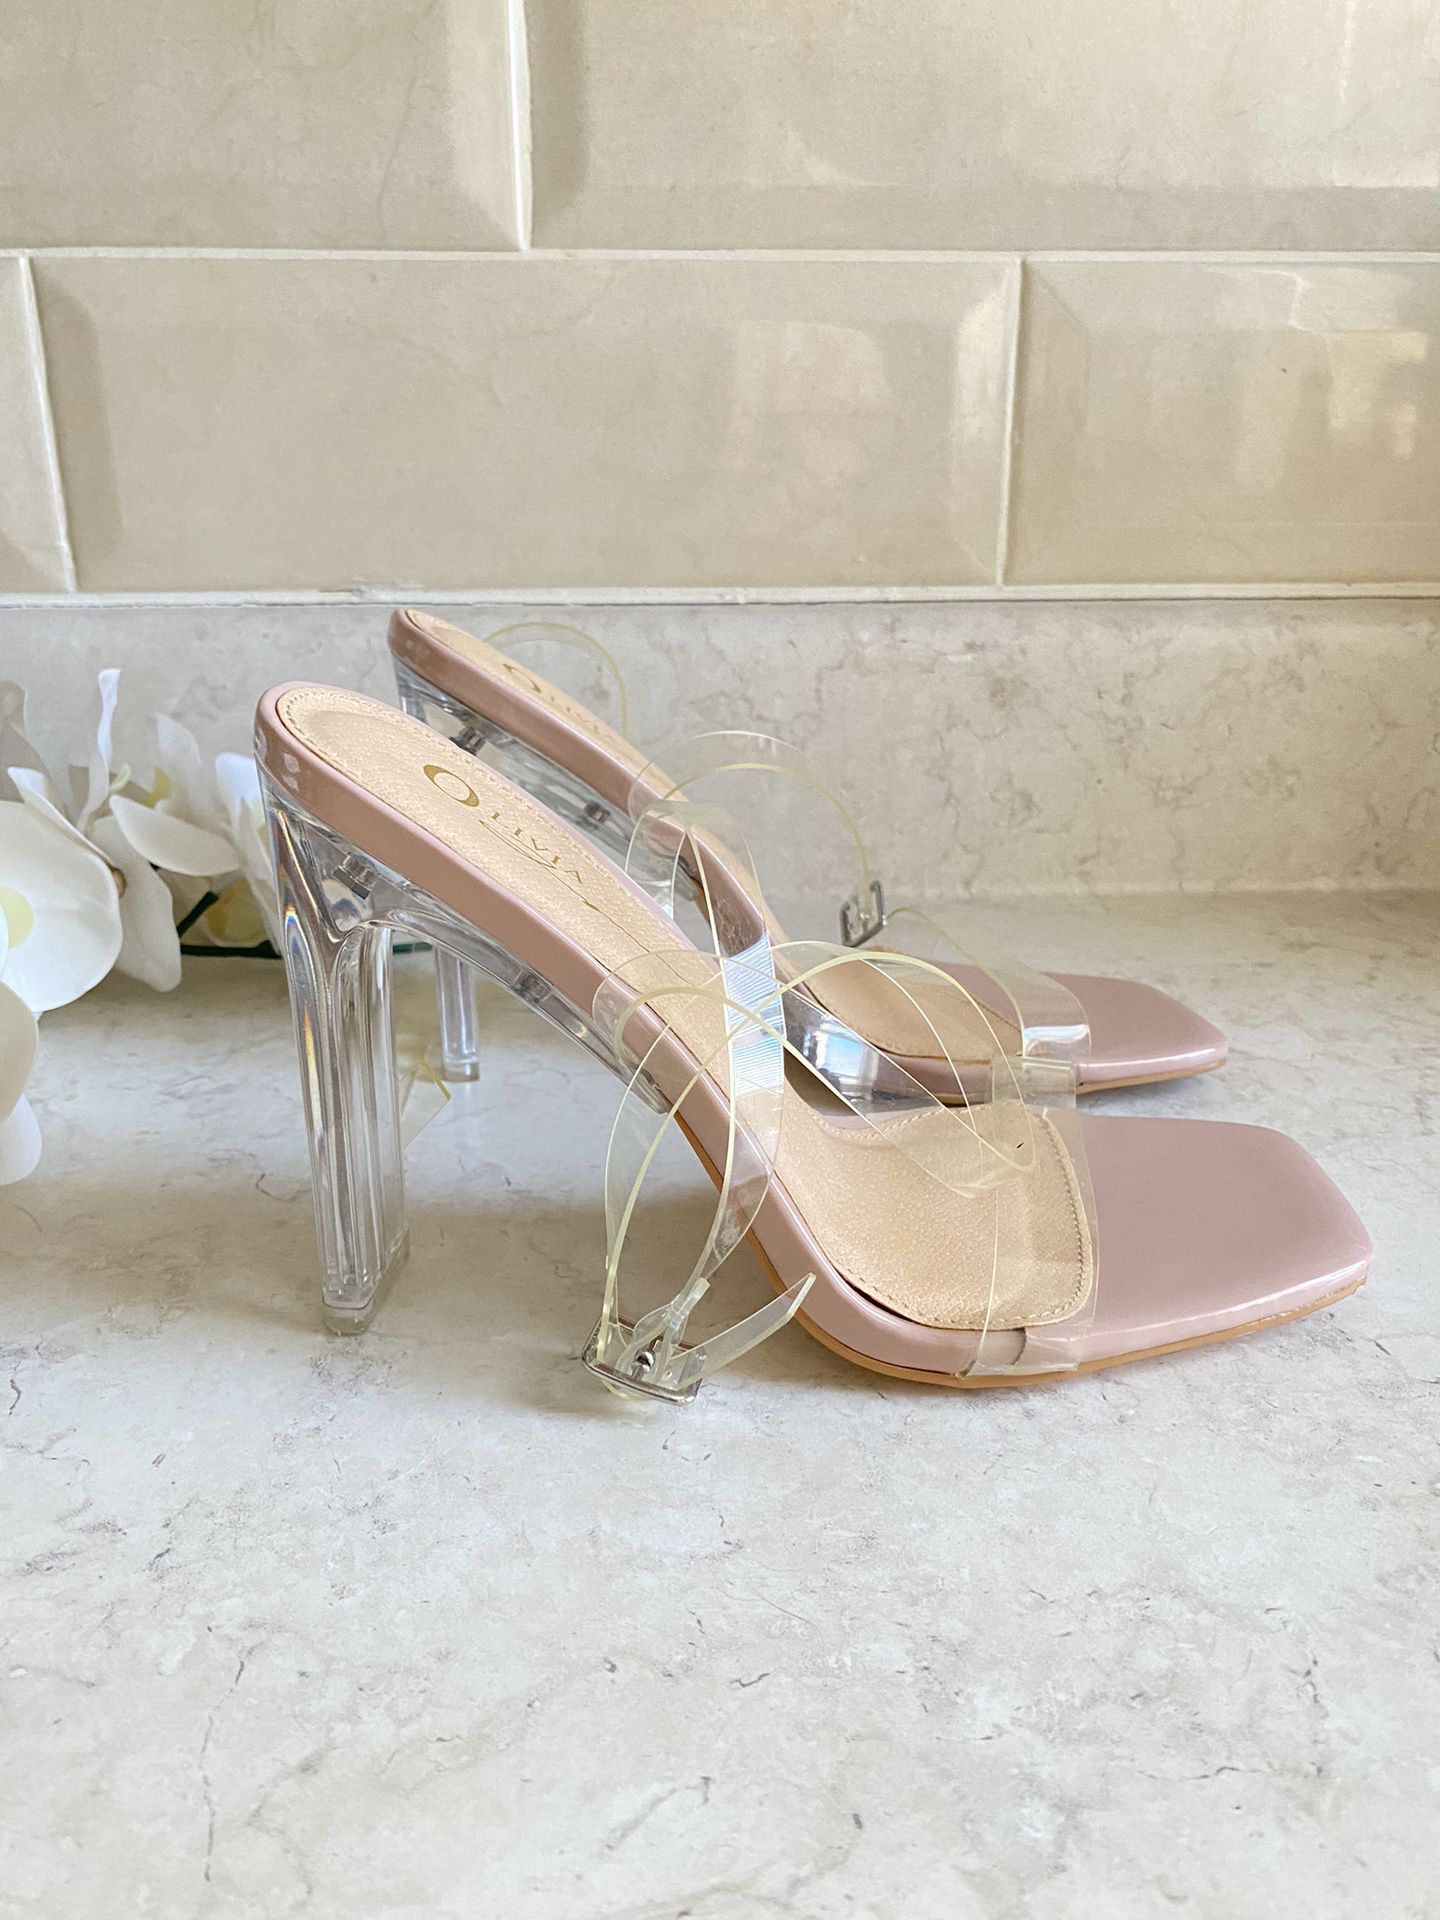 Olivia Jaymes Squared Toe Clear and Nude Heels Size 6